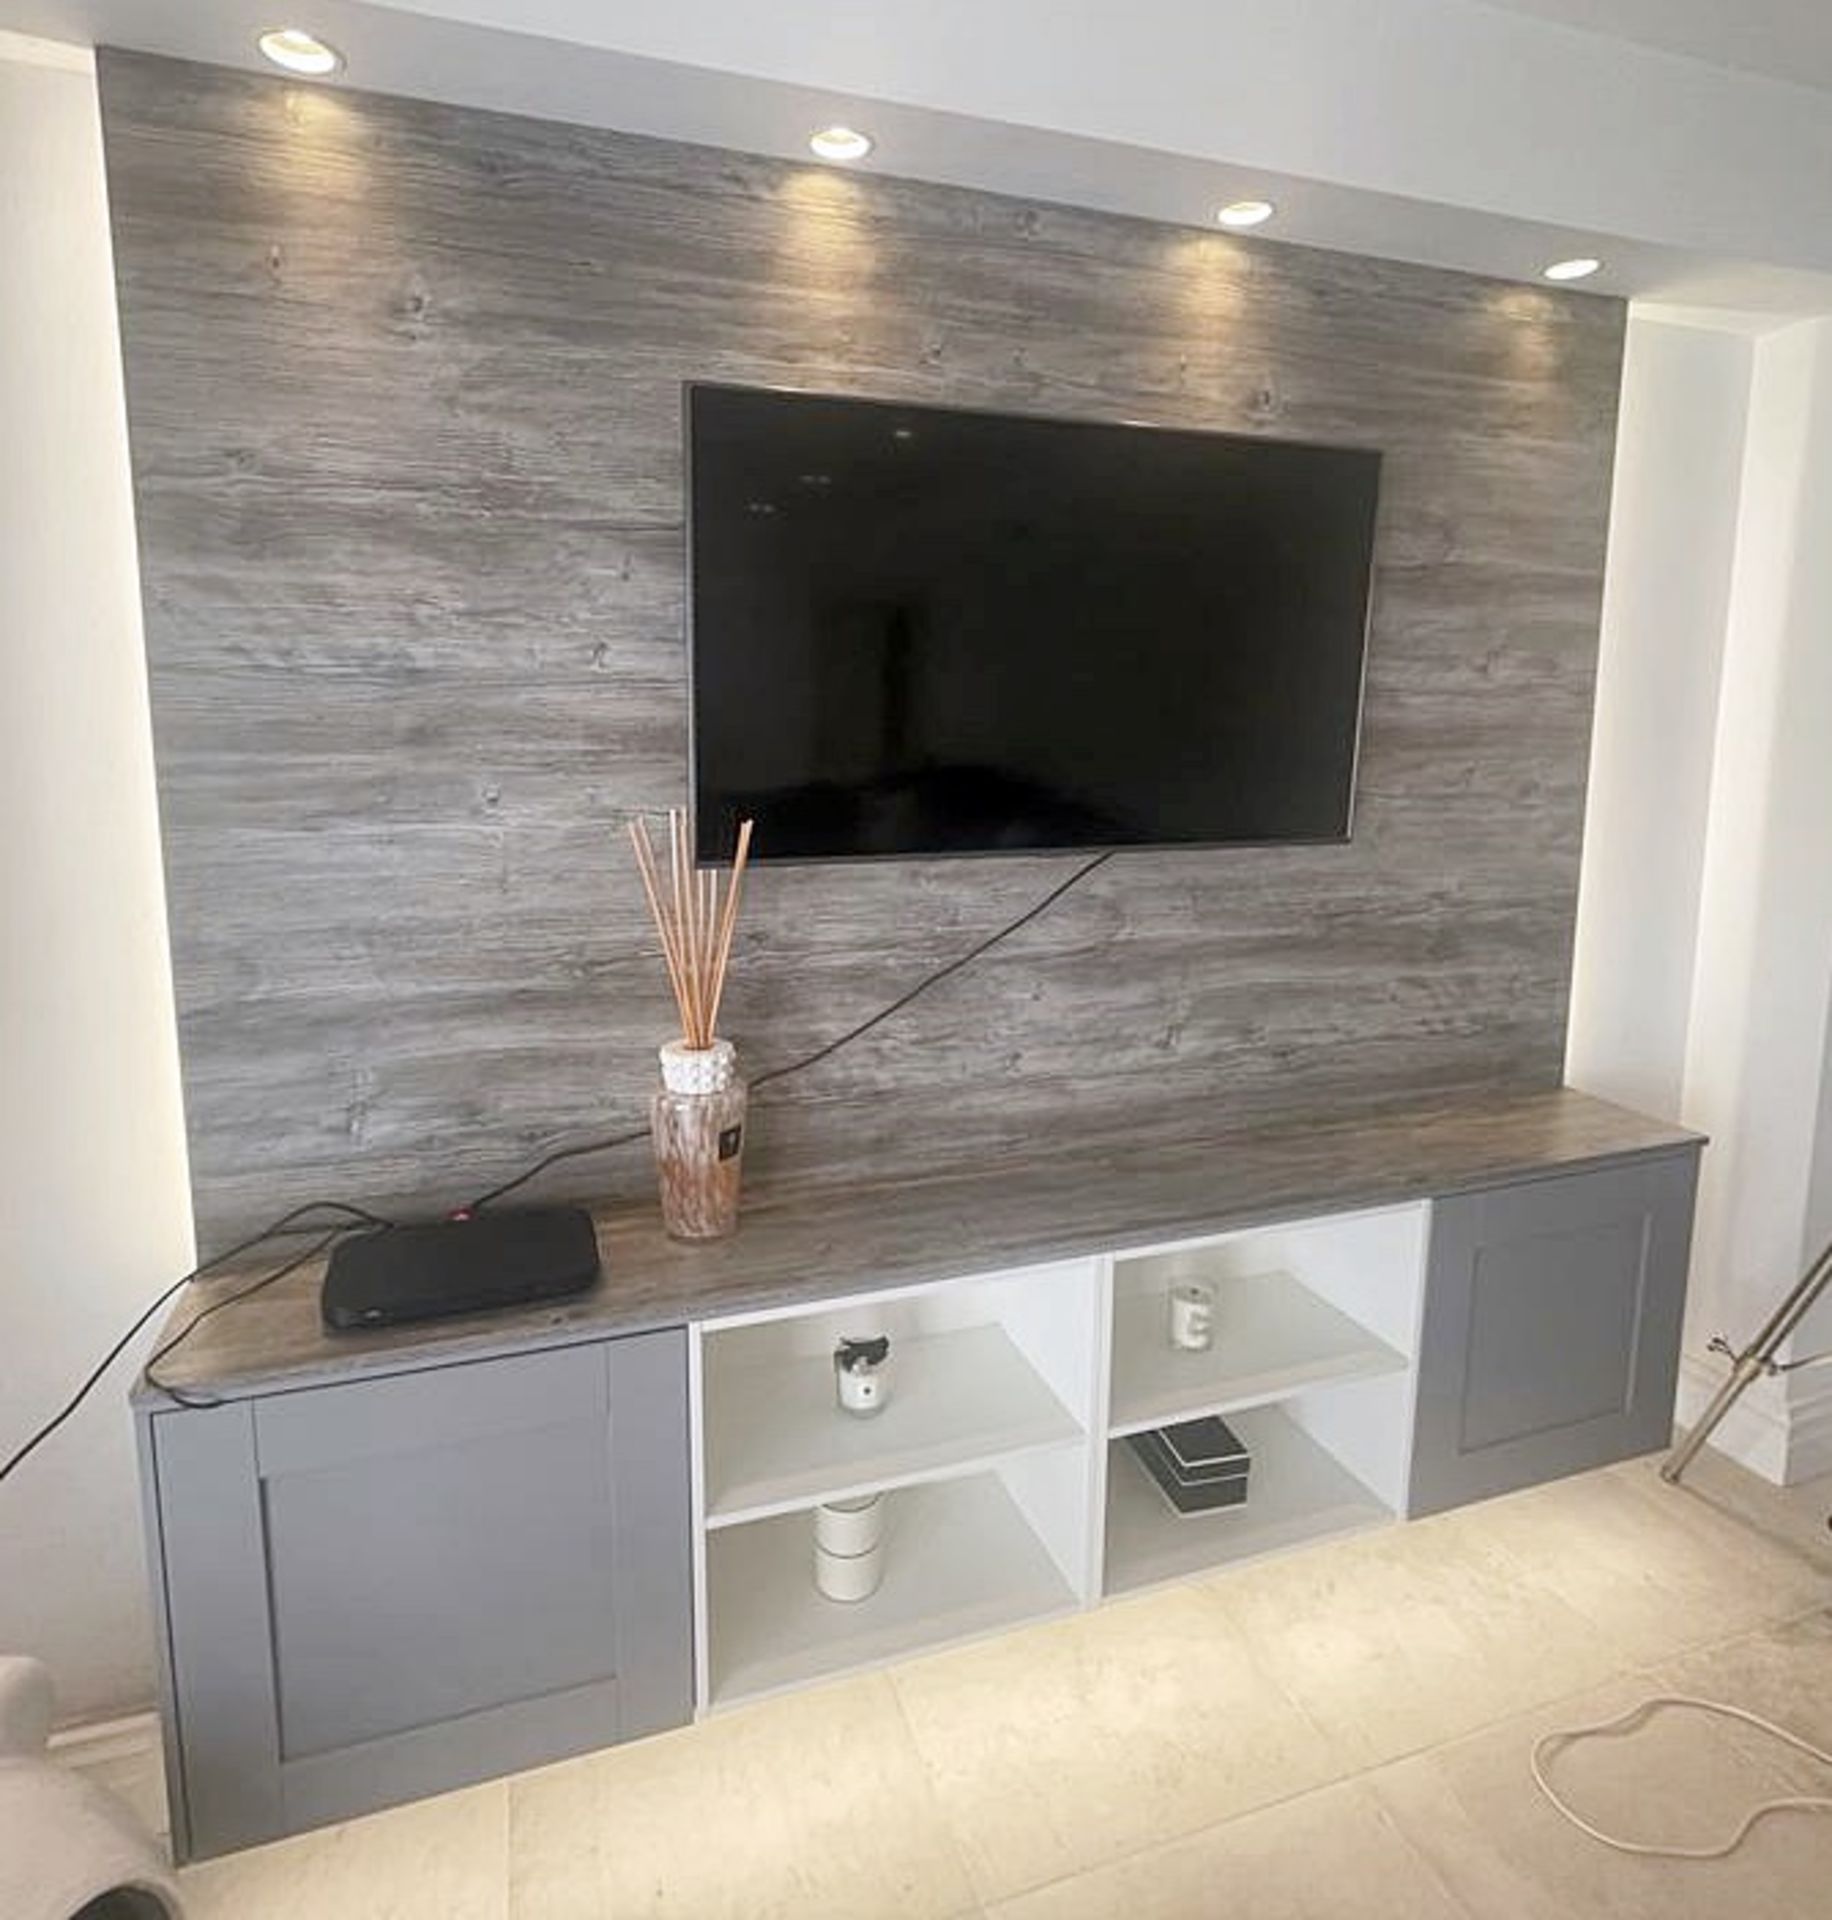 1 x Modern 2.4-Metre Wide TV Wall Unit with Storage in Limed Oak and Grey Finishes - Image 3 of 8